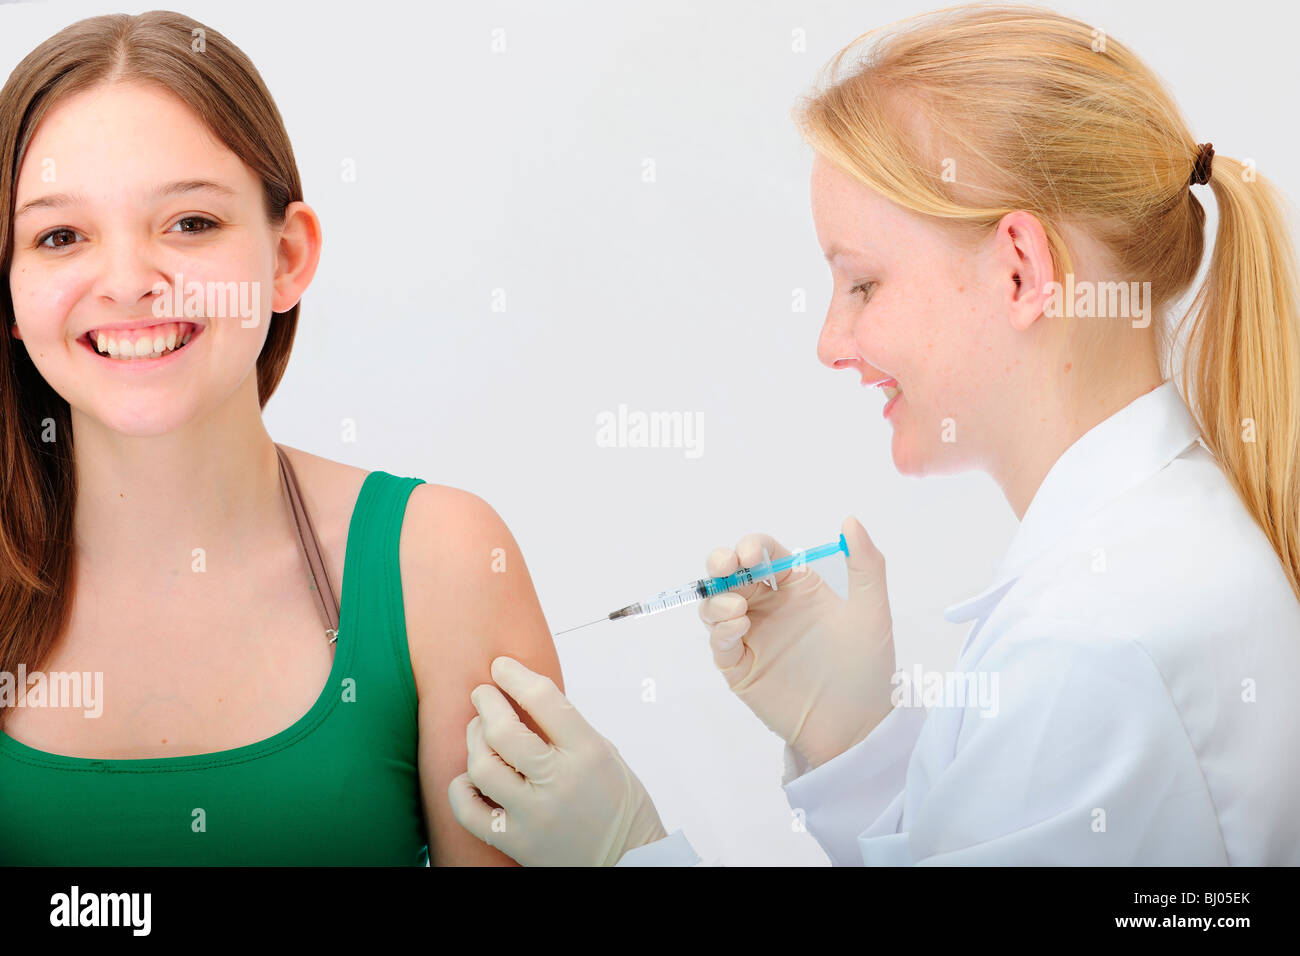 Vaccination: medical giving injection Stock Photo